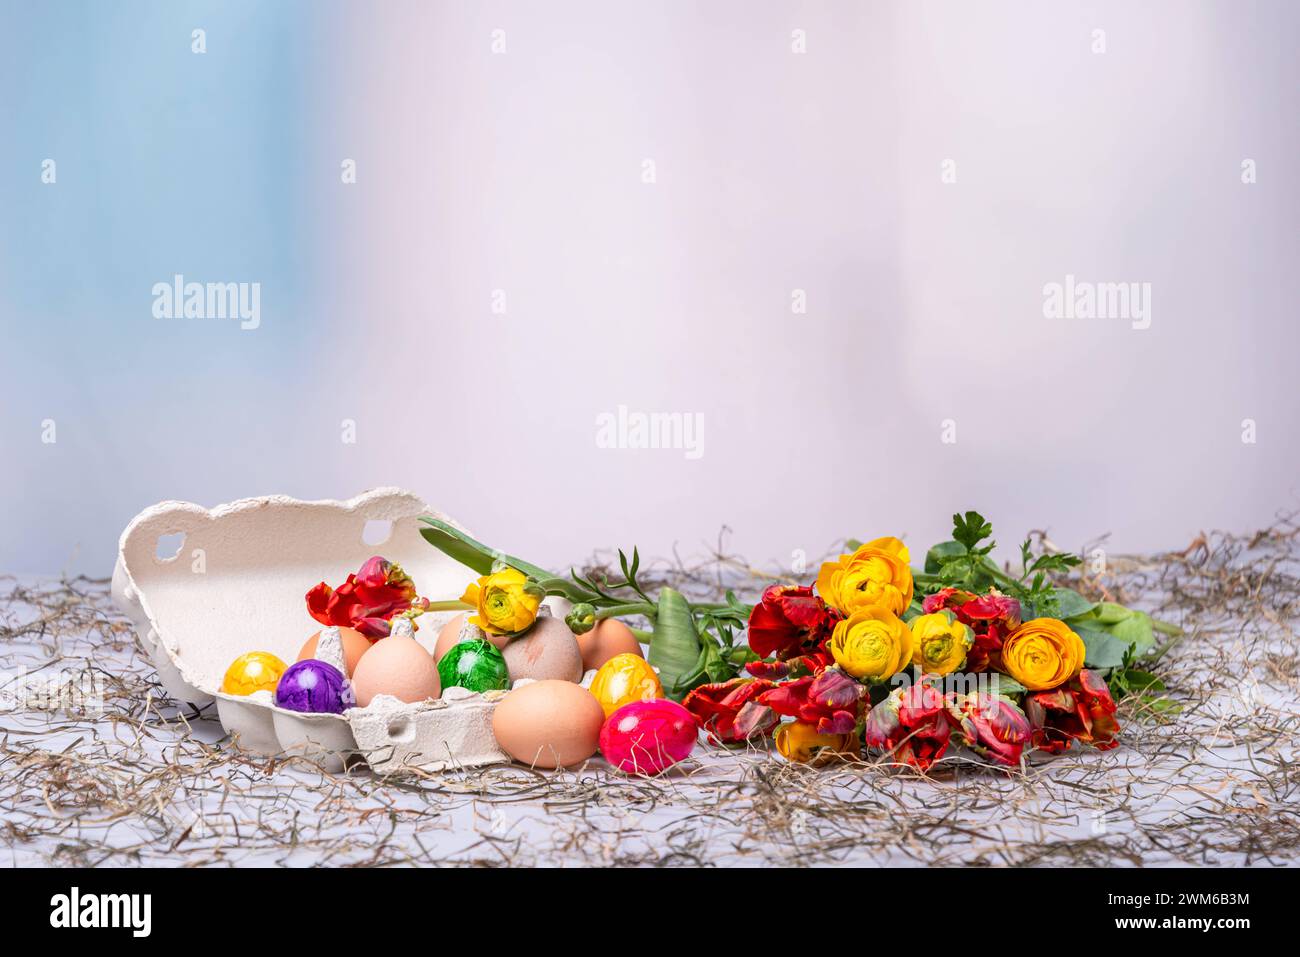 Bunte Ostereier auf einem Tisch mit Bumenstrauß als Postkartenmotiv zu Ostern *** Colorful Easter eggs on a table with a bouquet of flowers as a postcard motif for Easter Stock Photo